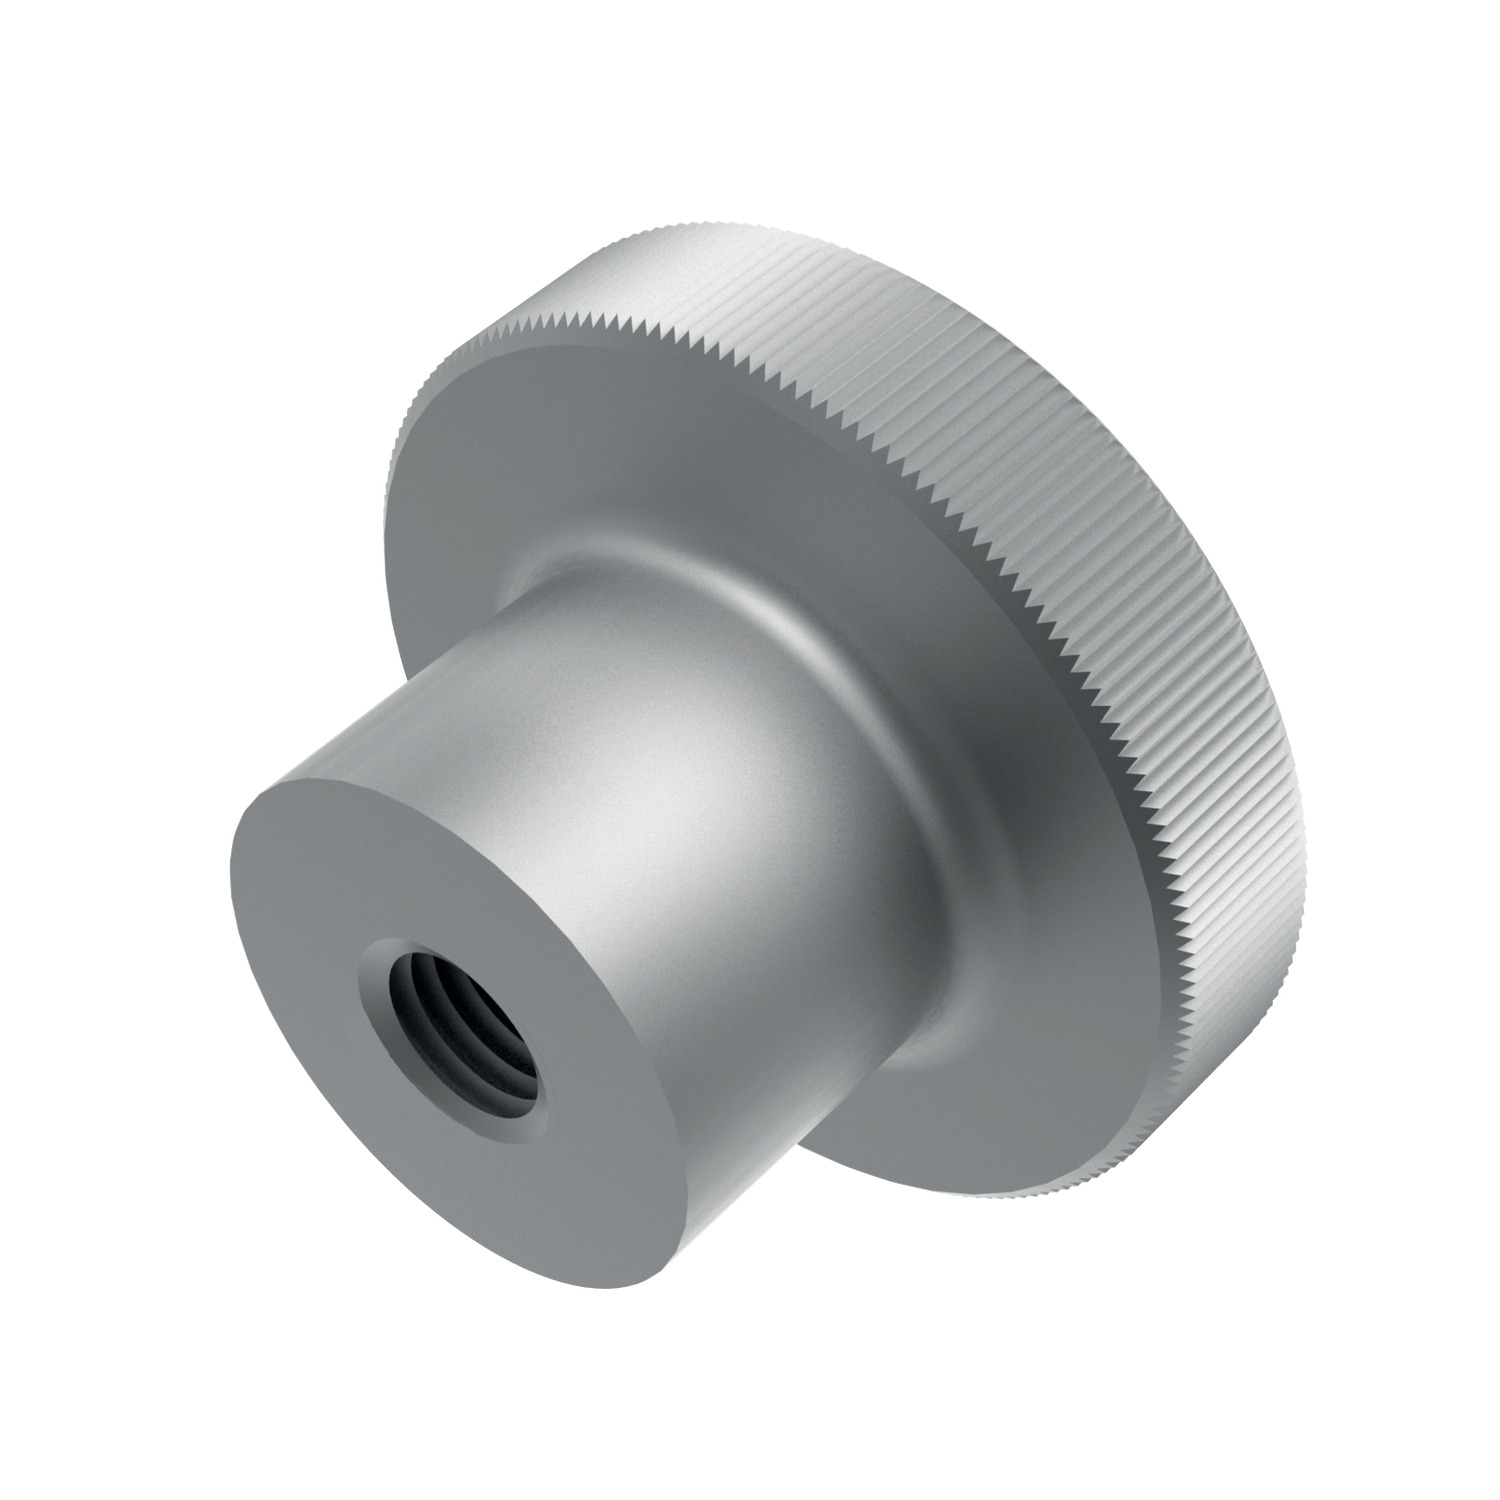 P0403.020-A2 Knurled Nuts with Collar M2 A2 s/s 